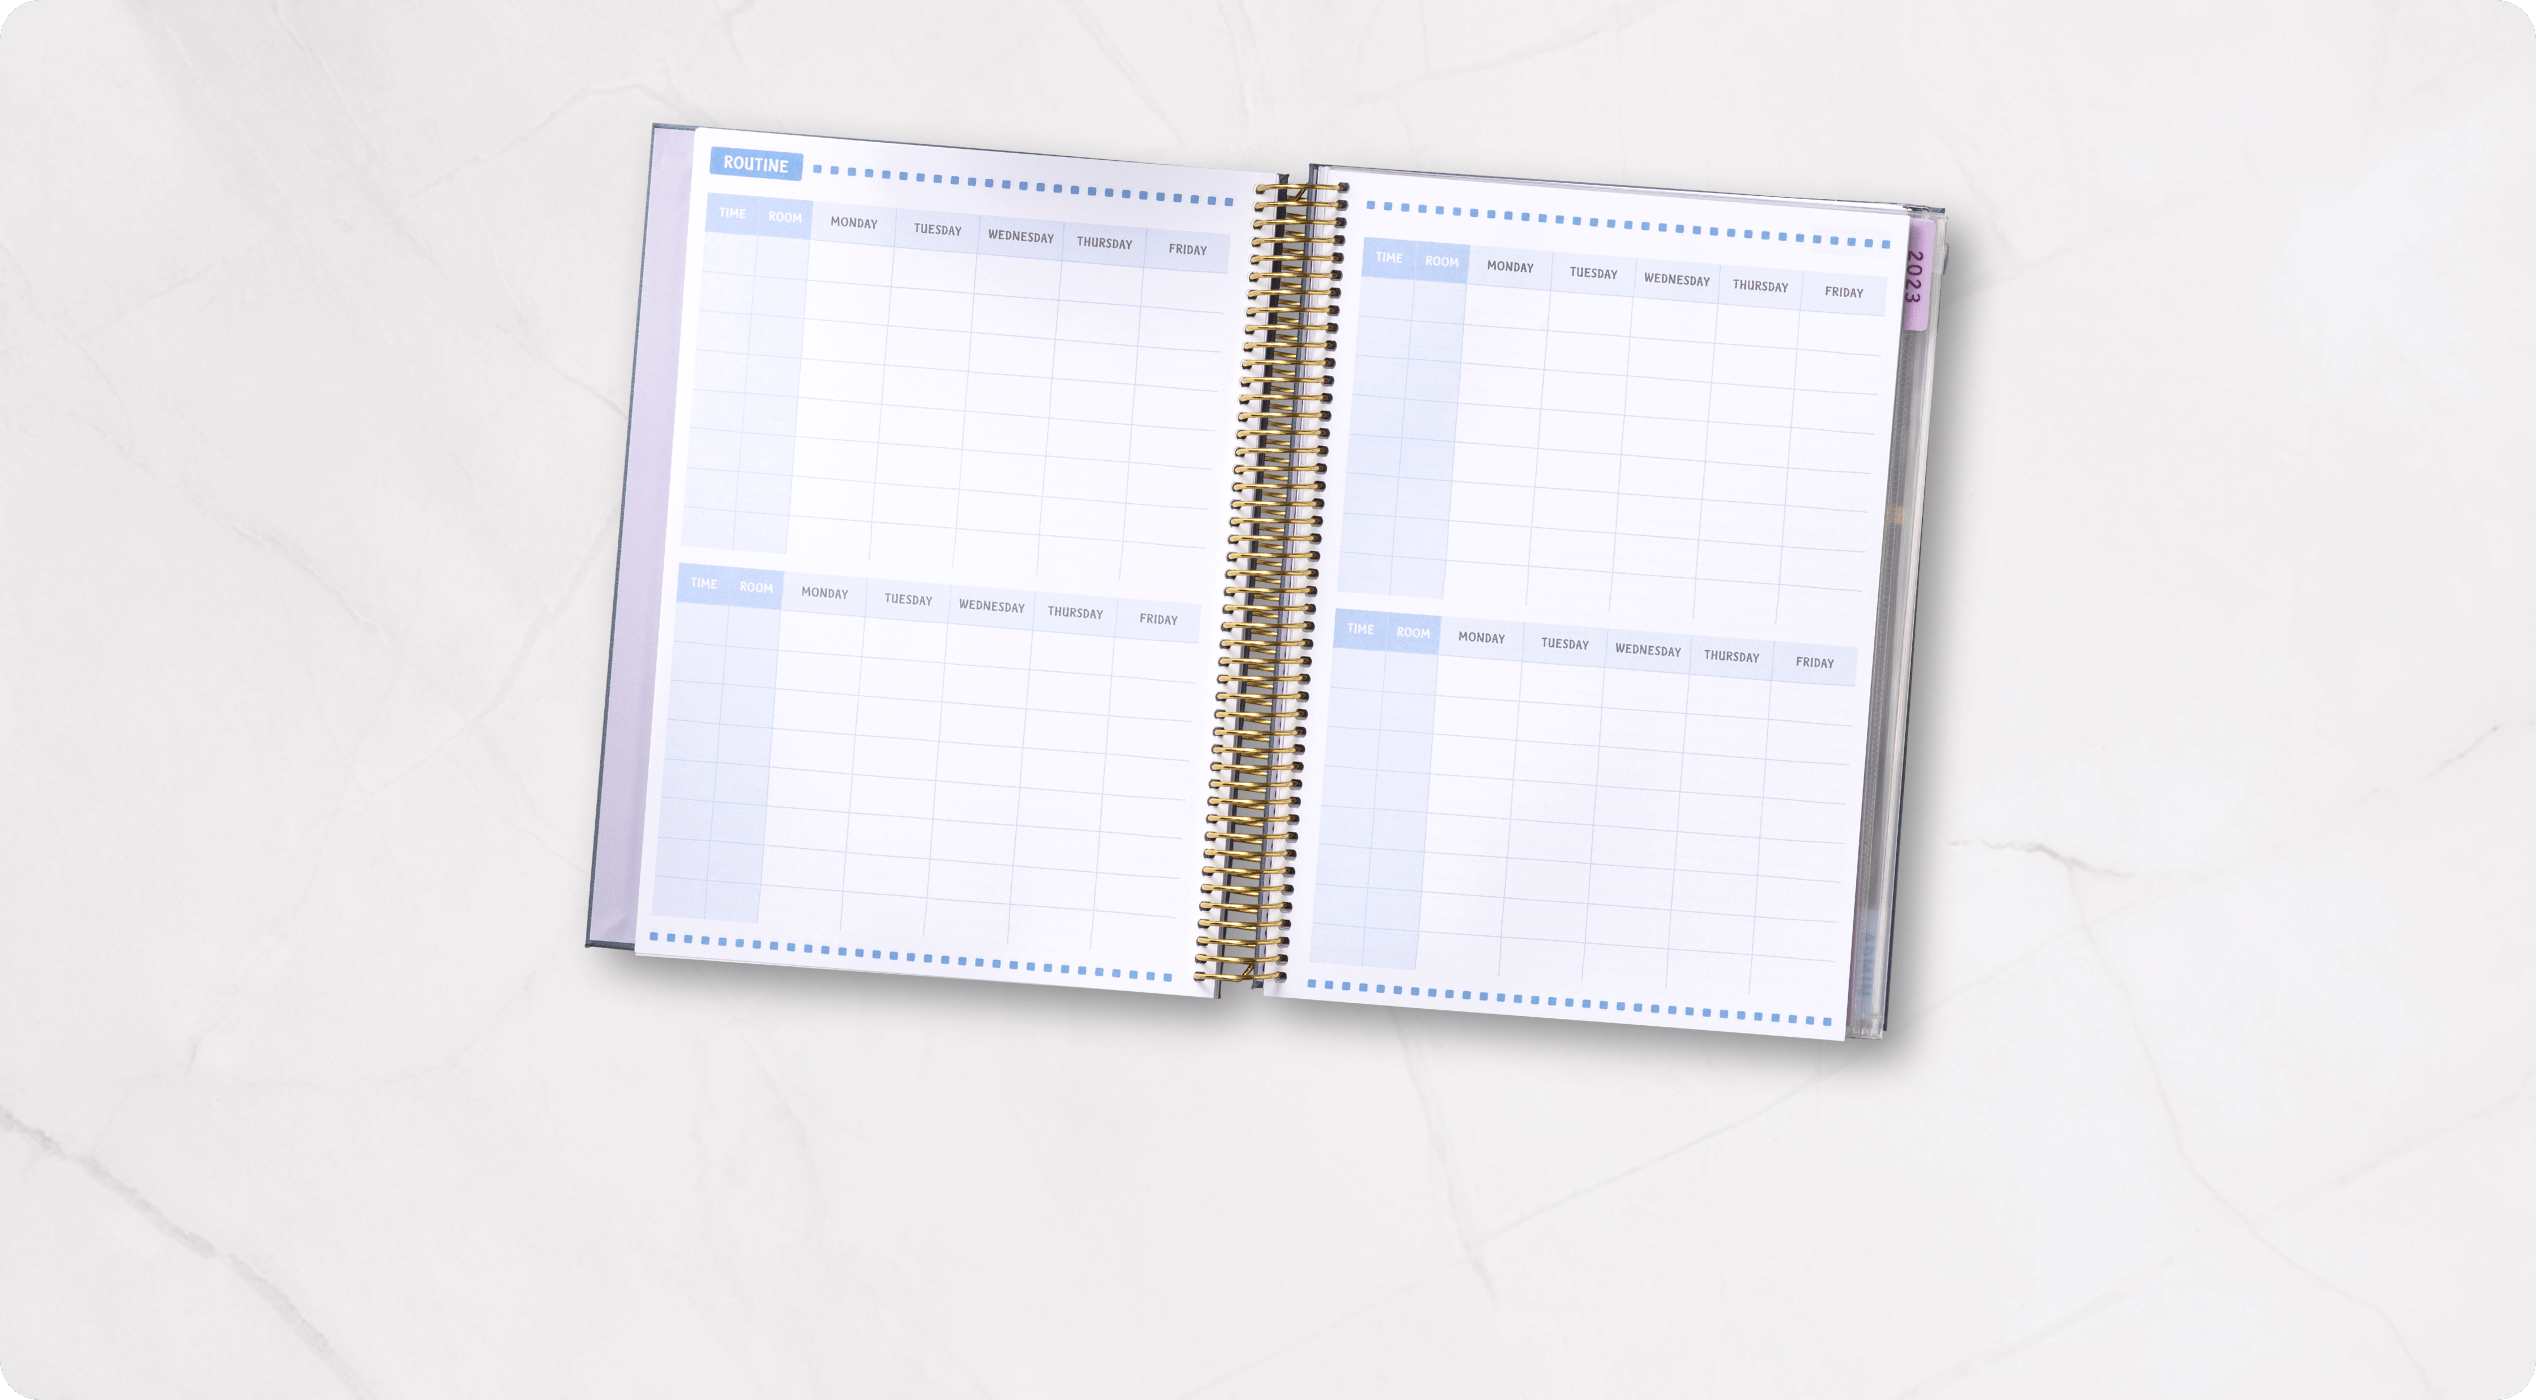 08/10 - Keep track of your rooms and routines in style!